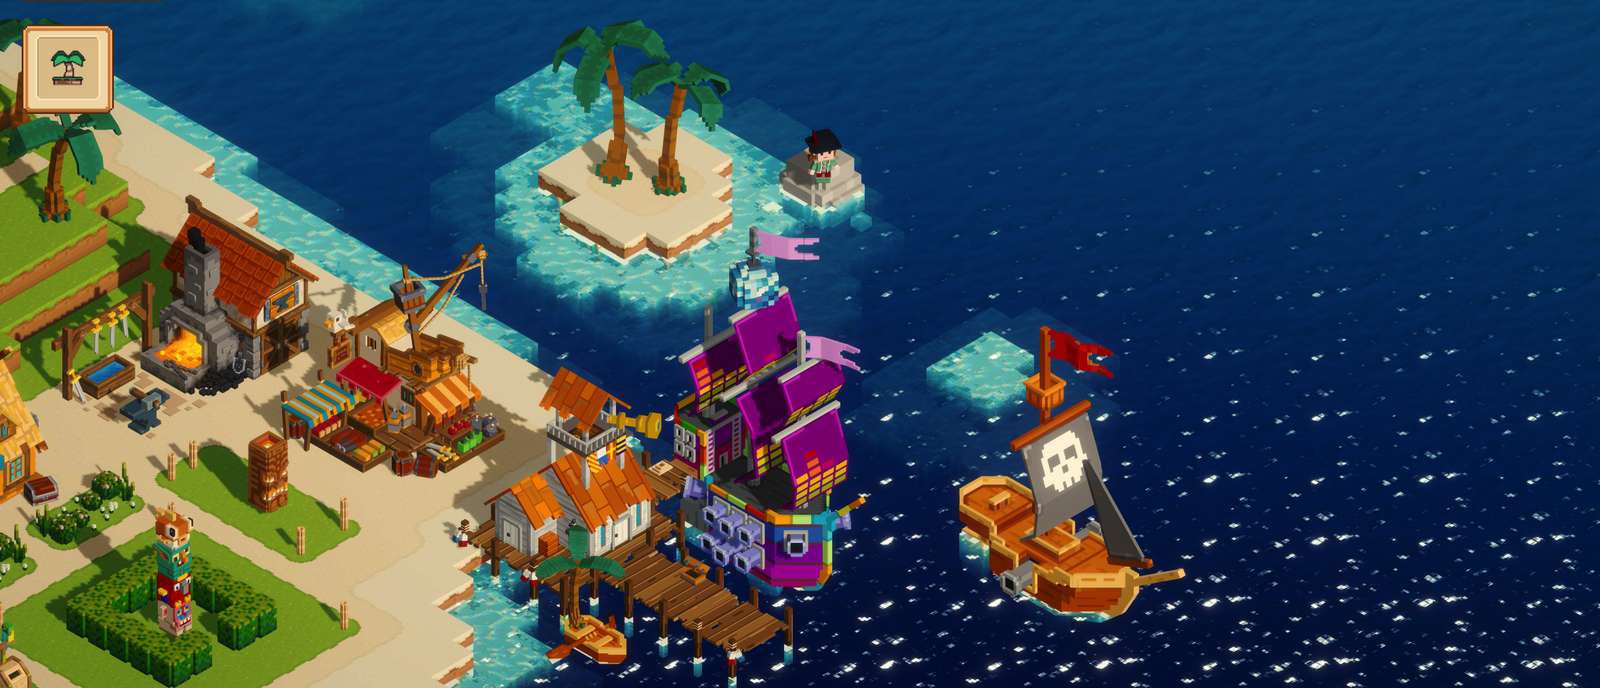 Evento final - Pirate Nation puzzle online